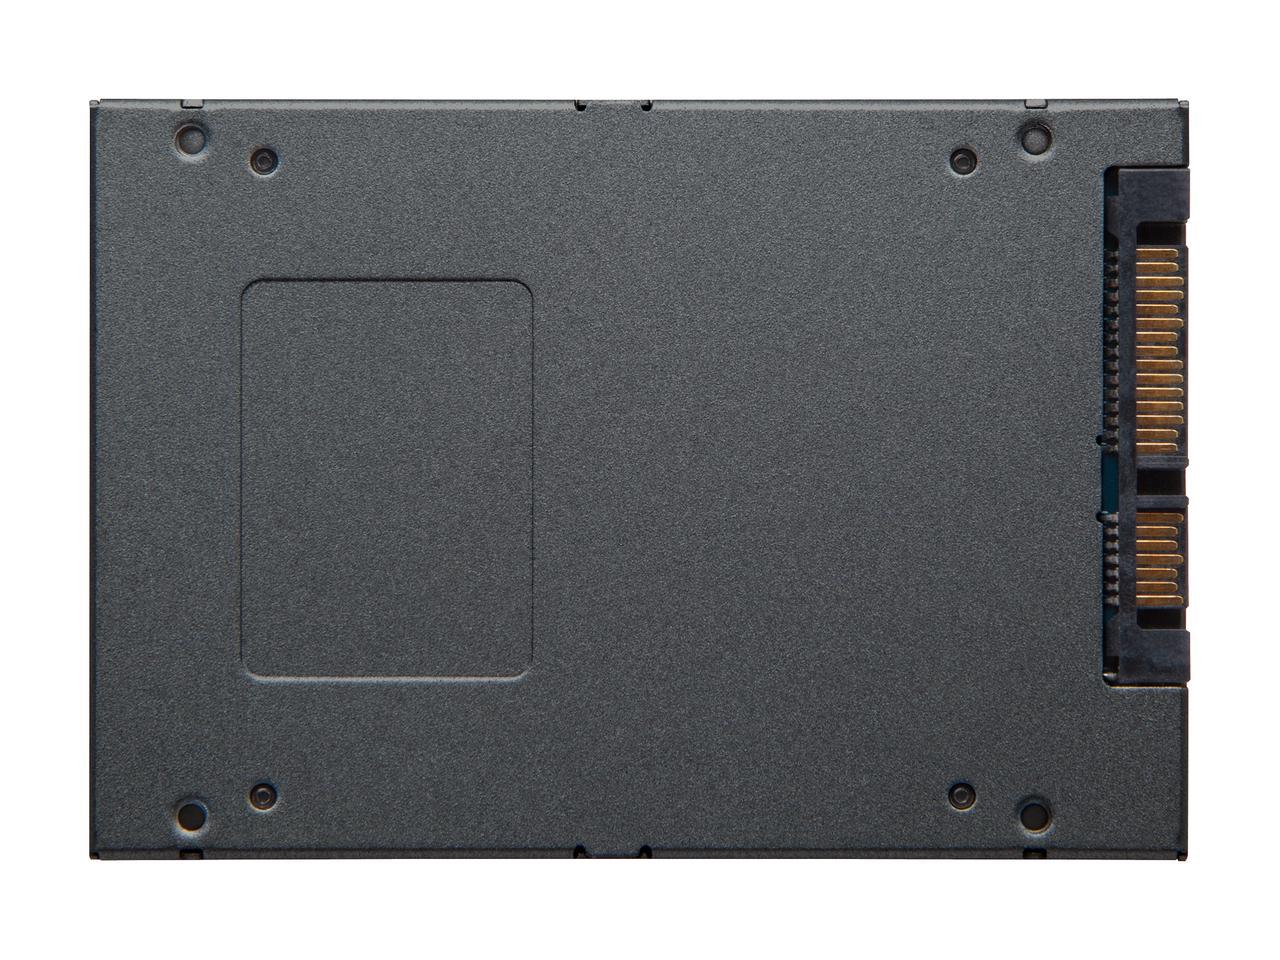 2017: Kingston A400 SSD Becomes The Entry-Level SATA Drive - Reviews